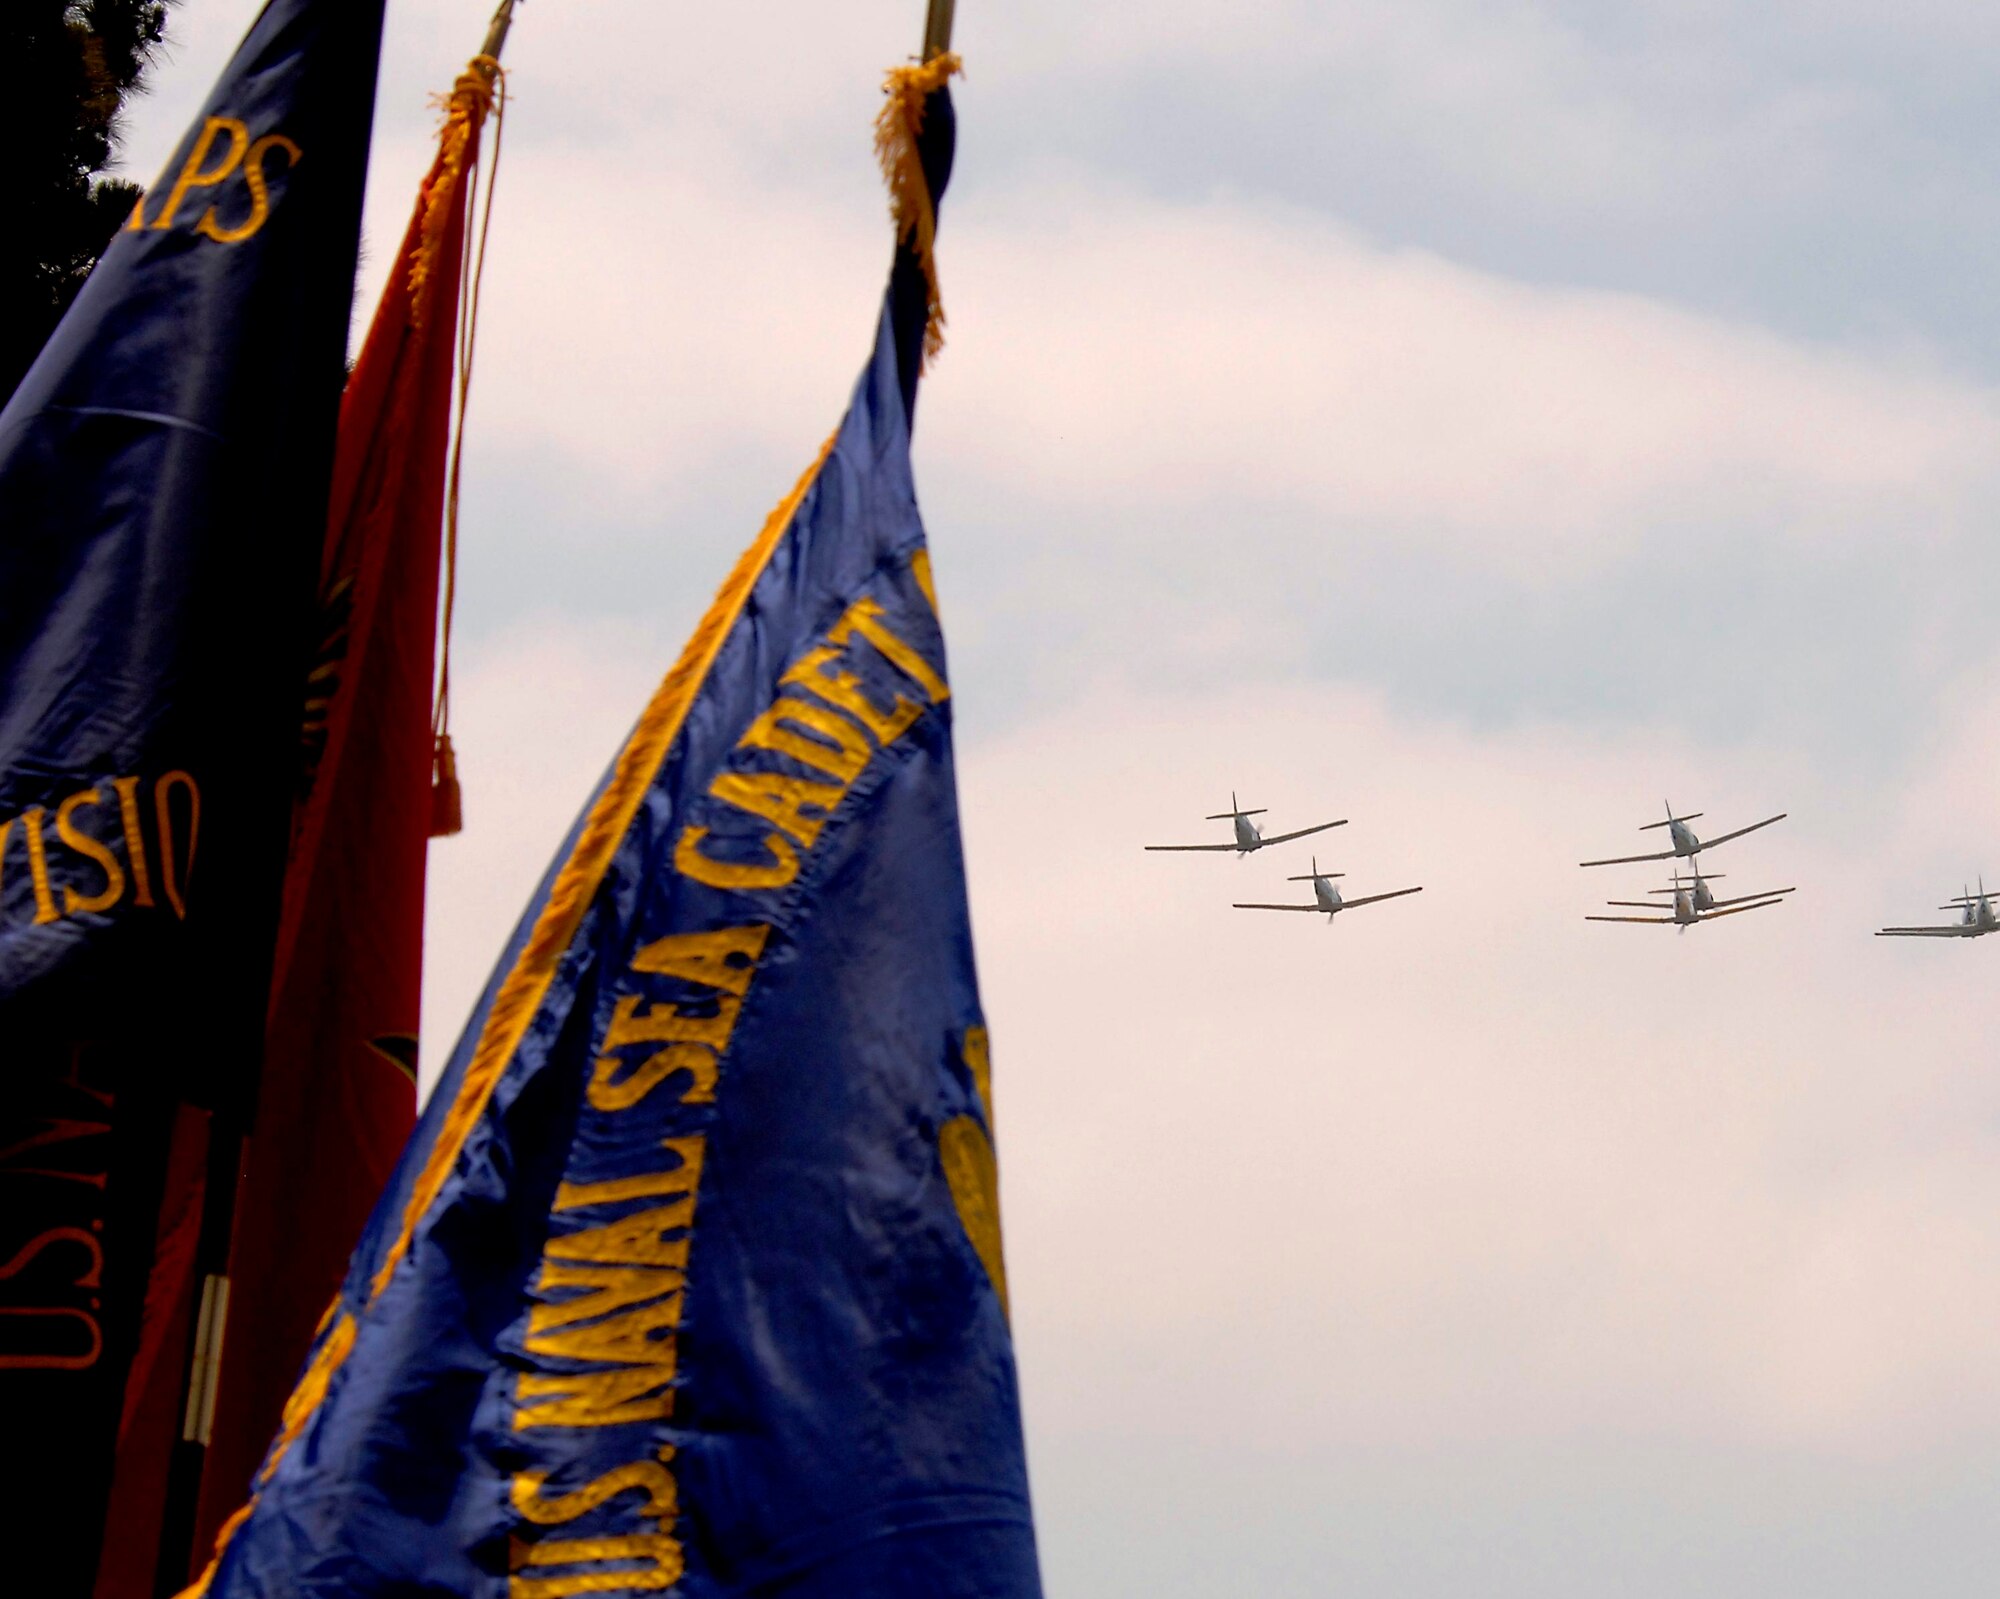 WW II-era T-6 trainer aircraft, piloted by members of the Condor Squadron, flyover the Los Angeles National Cemetery during this year’s Memorial Day salute, May 28. Lt. Gen. Michael Hamel, SMC Commander, was the keynote speaker.